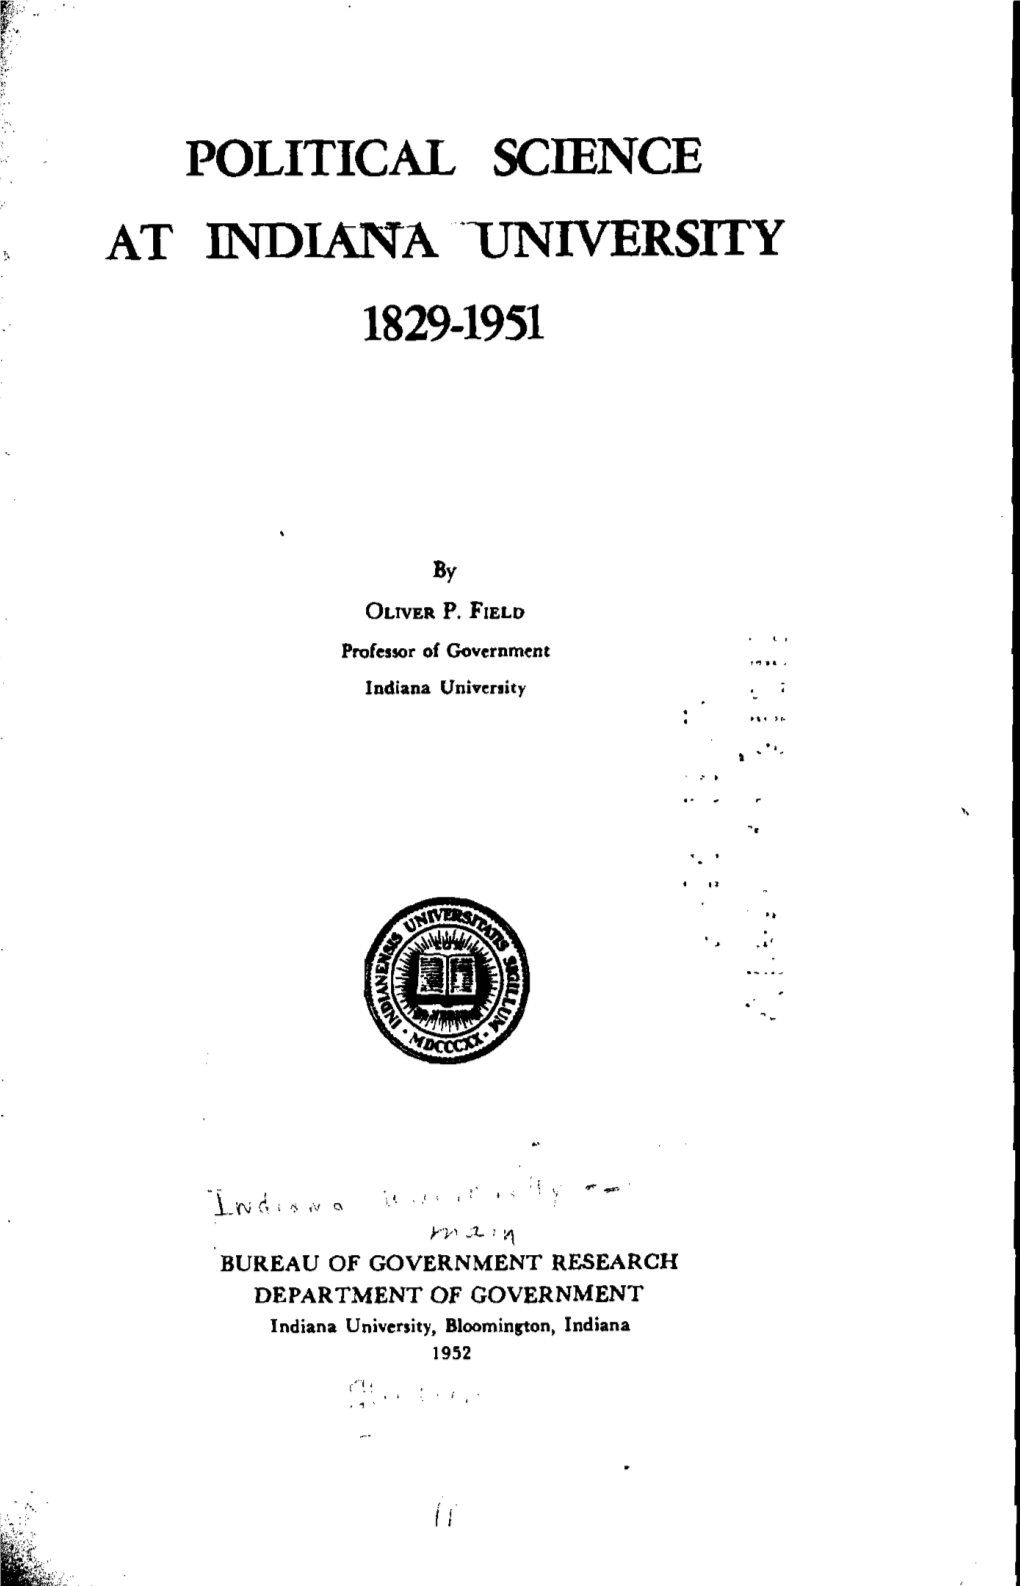 Political Science at Indiana "University 1829-1951